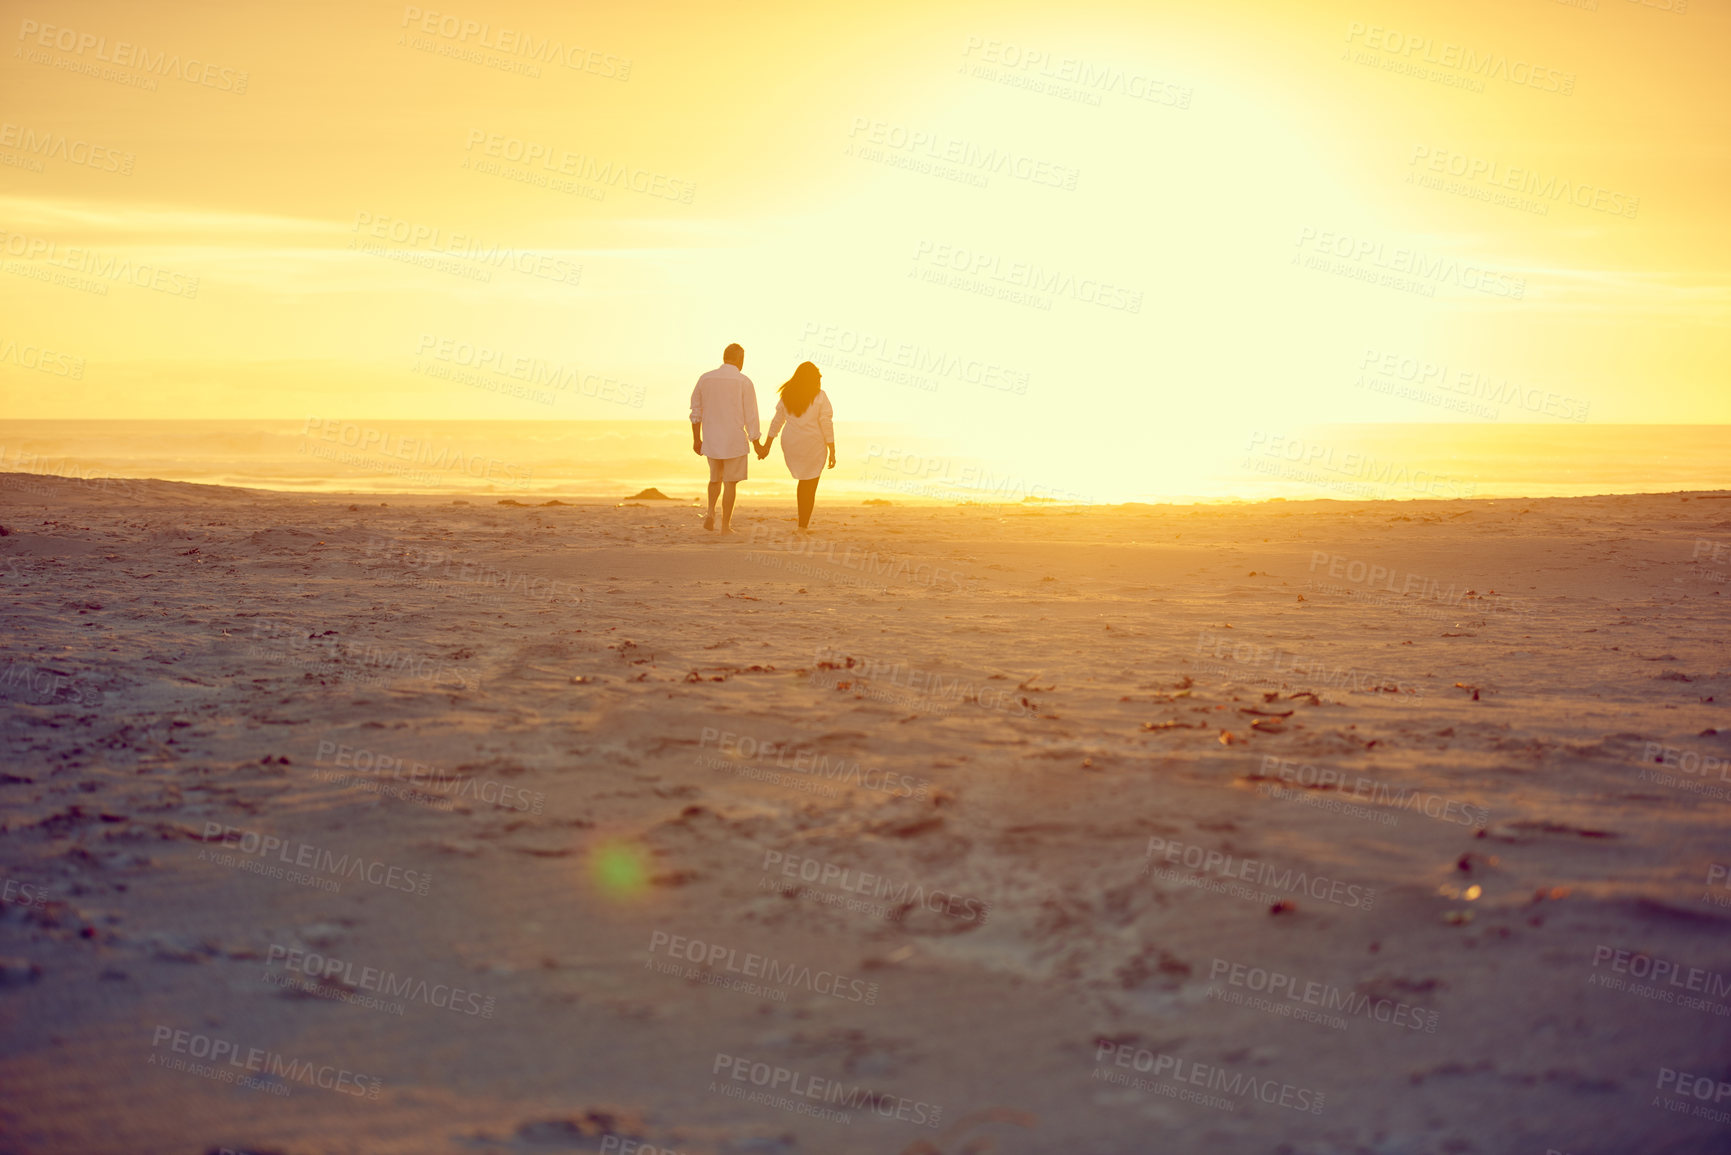 Buy stock photo Rearview shot of an affectionate mature couple walking hand in hand on the beach